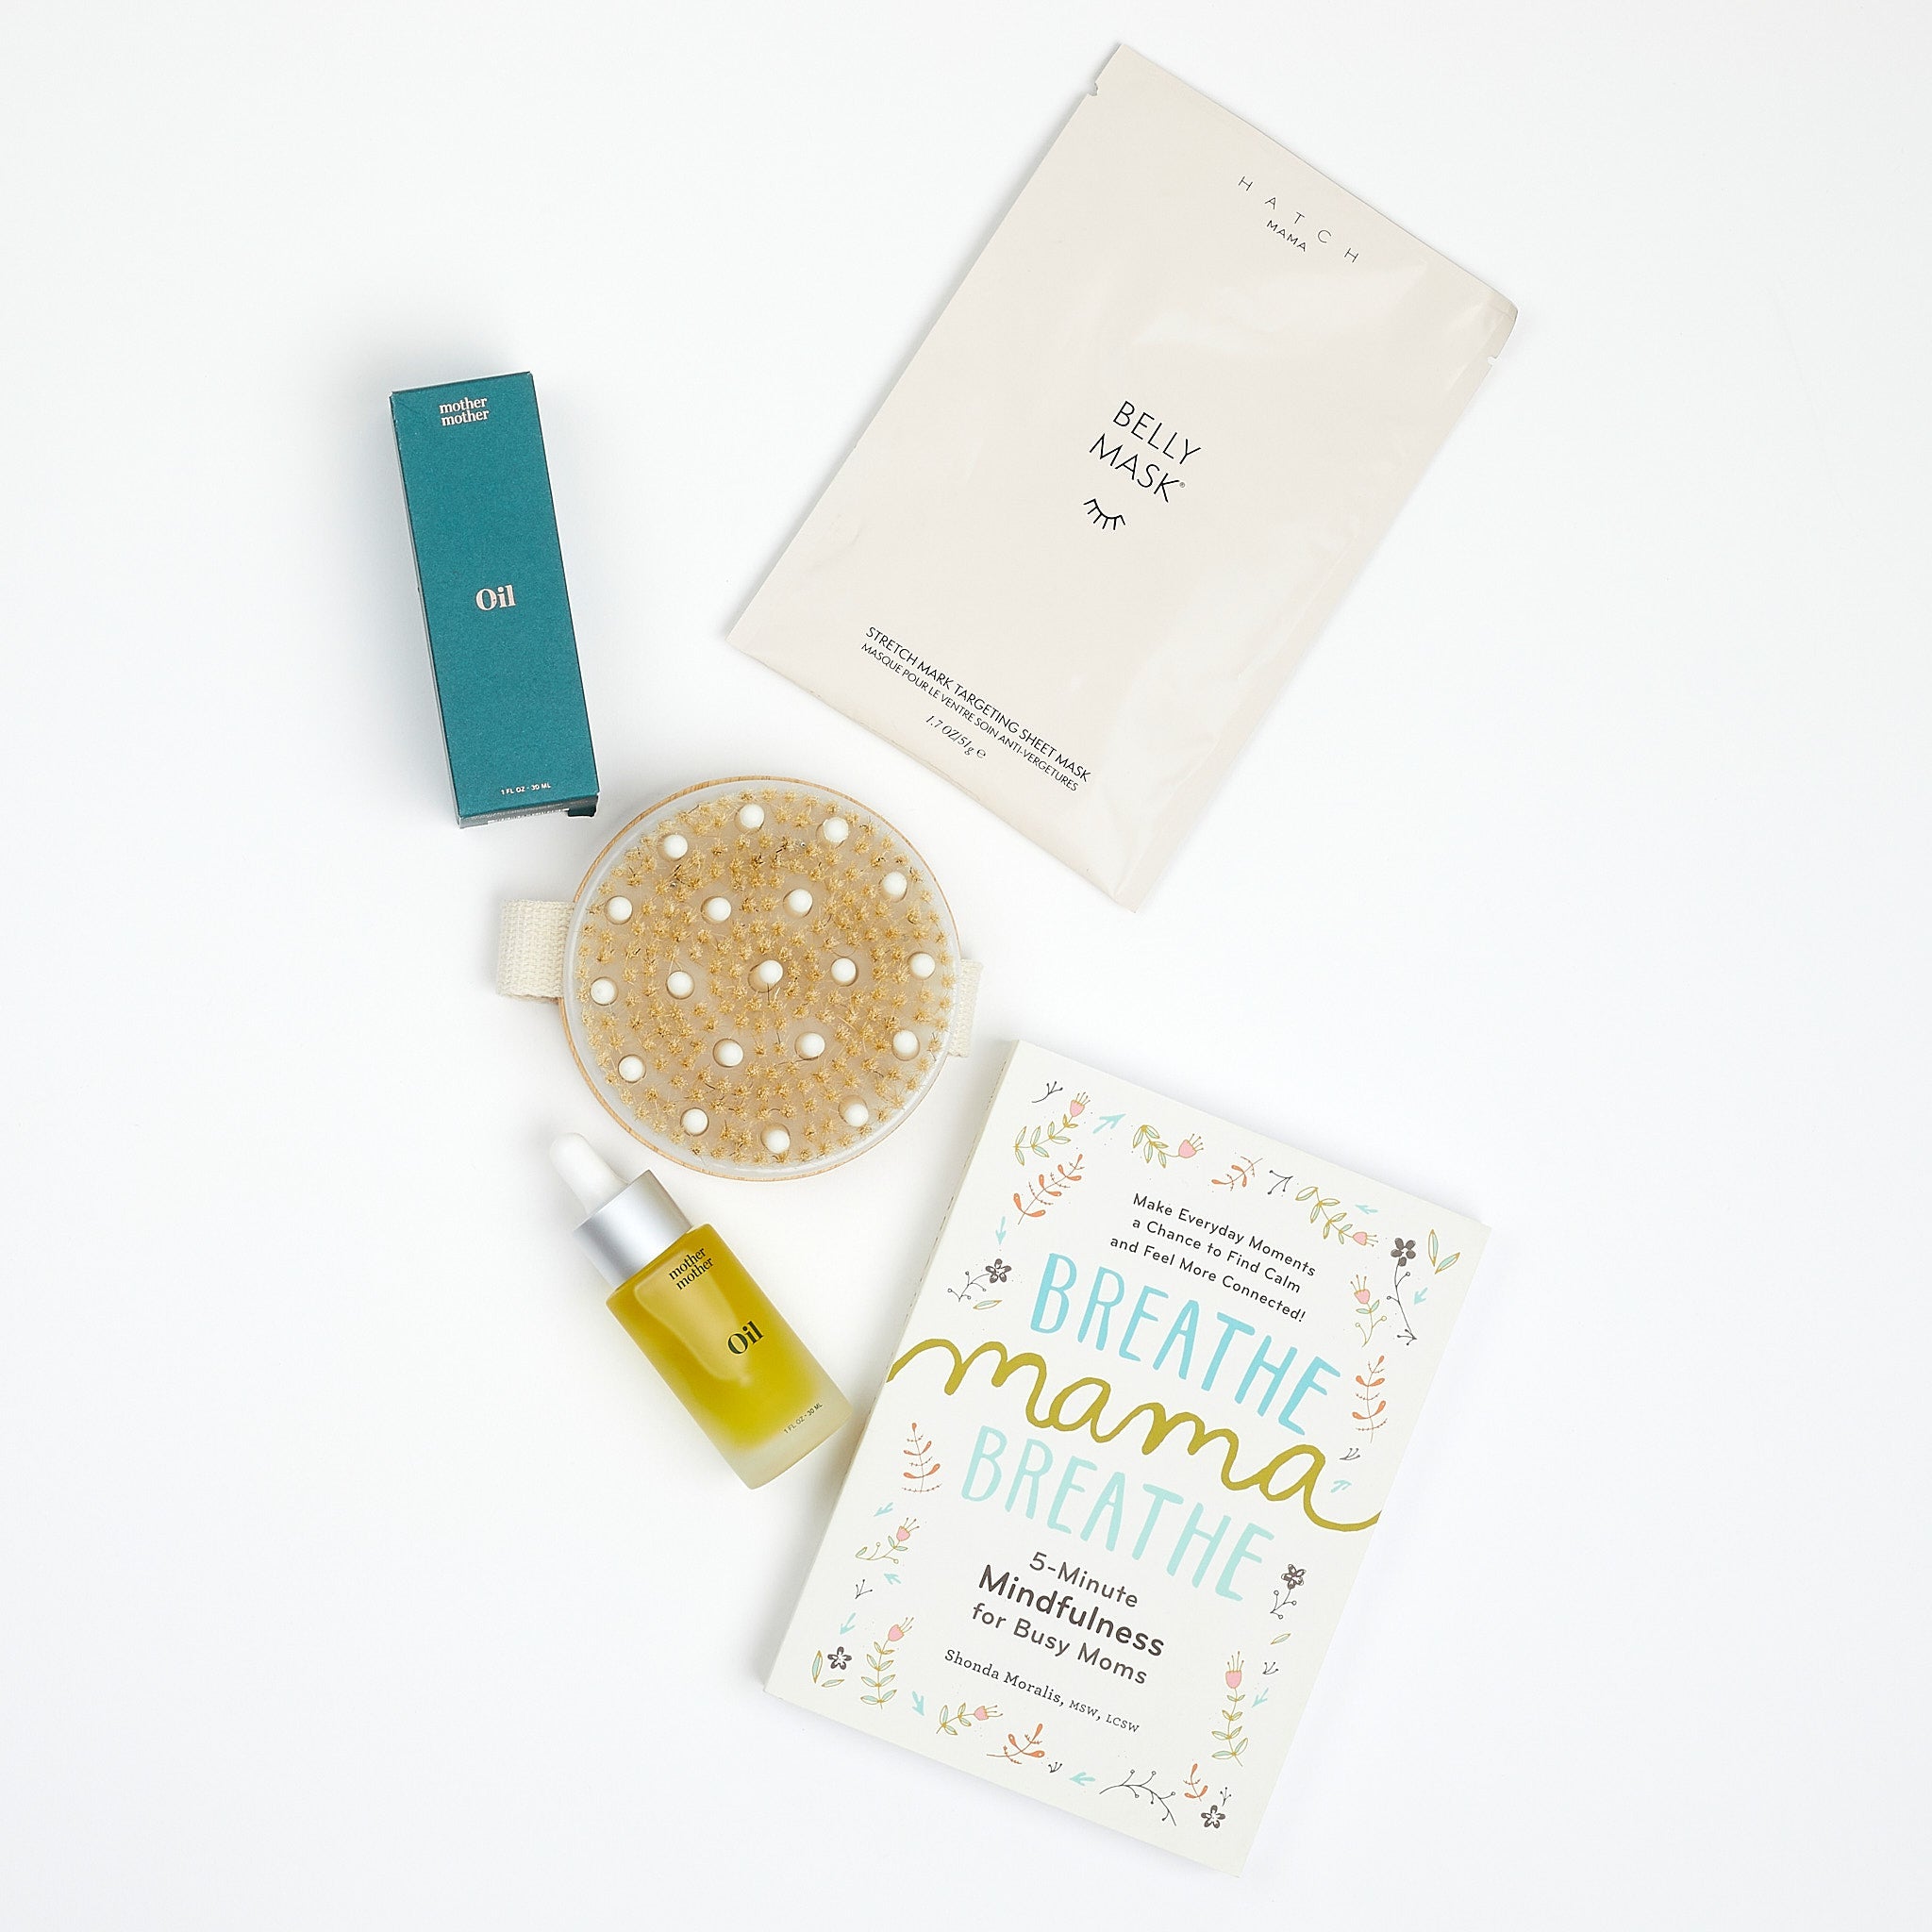 &quot;Breathe Mama Breathe&quot; Book, Le Pen Teal Pen, Mother Mother Belly Oil, HATCH Belly Sheet Mask , and BOXFOX Round Dry Brush